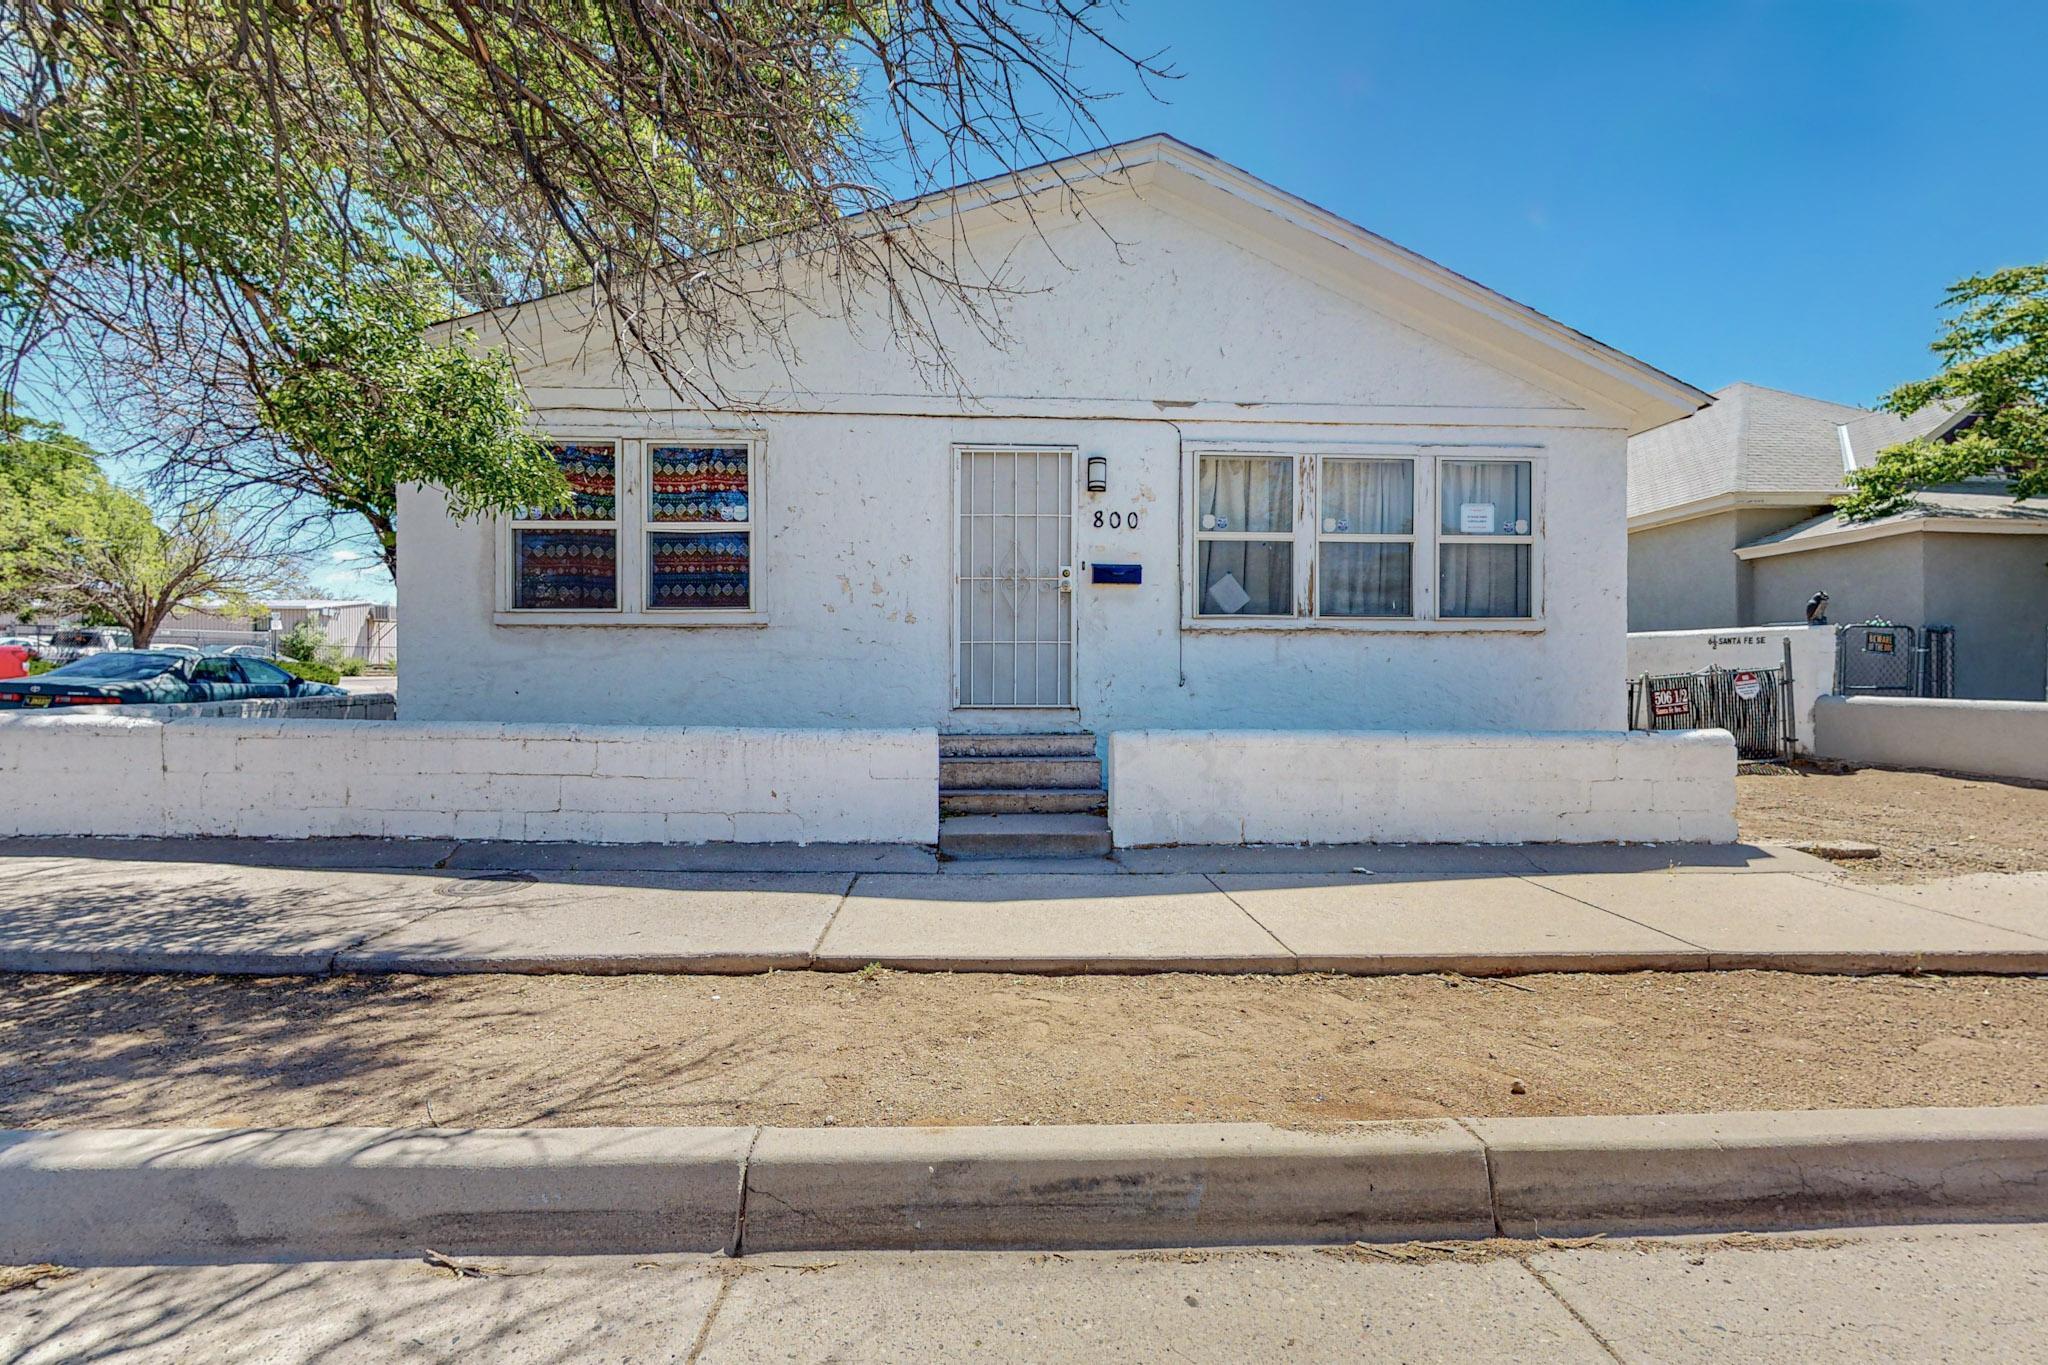 Welcome to a great investment opportunity in the heart of Albuquerque's historic downtown district.  This 4 bedroom 1 bathroom property is positioned on a corner lot.  The property spans a generous layout, ensuring ample space for tenants to live comfortably.  This downtown location and proximity to essential amenities, including schools, and restaurants including public transportation.  This property is more than just a property, it's a chance to own  a piece of Albuquerque's history while securing a reliable income stream.  The sale of this property also includes 506 Santa Fe Ave SE.